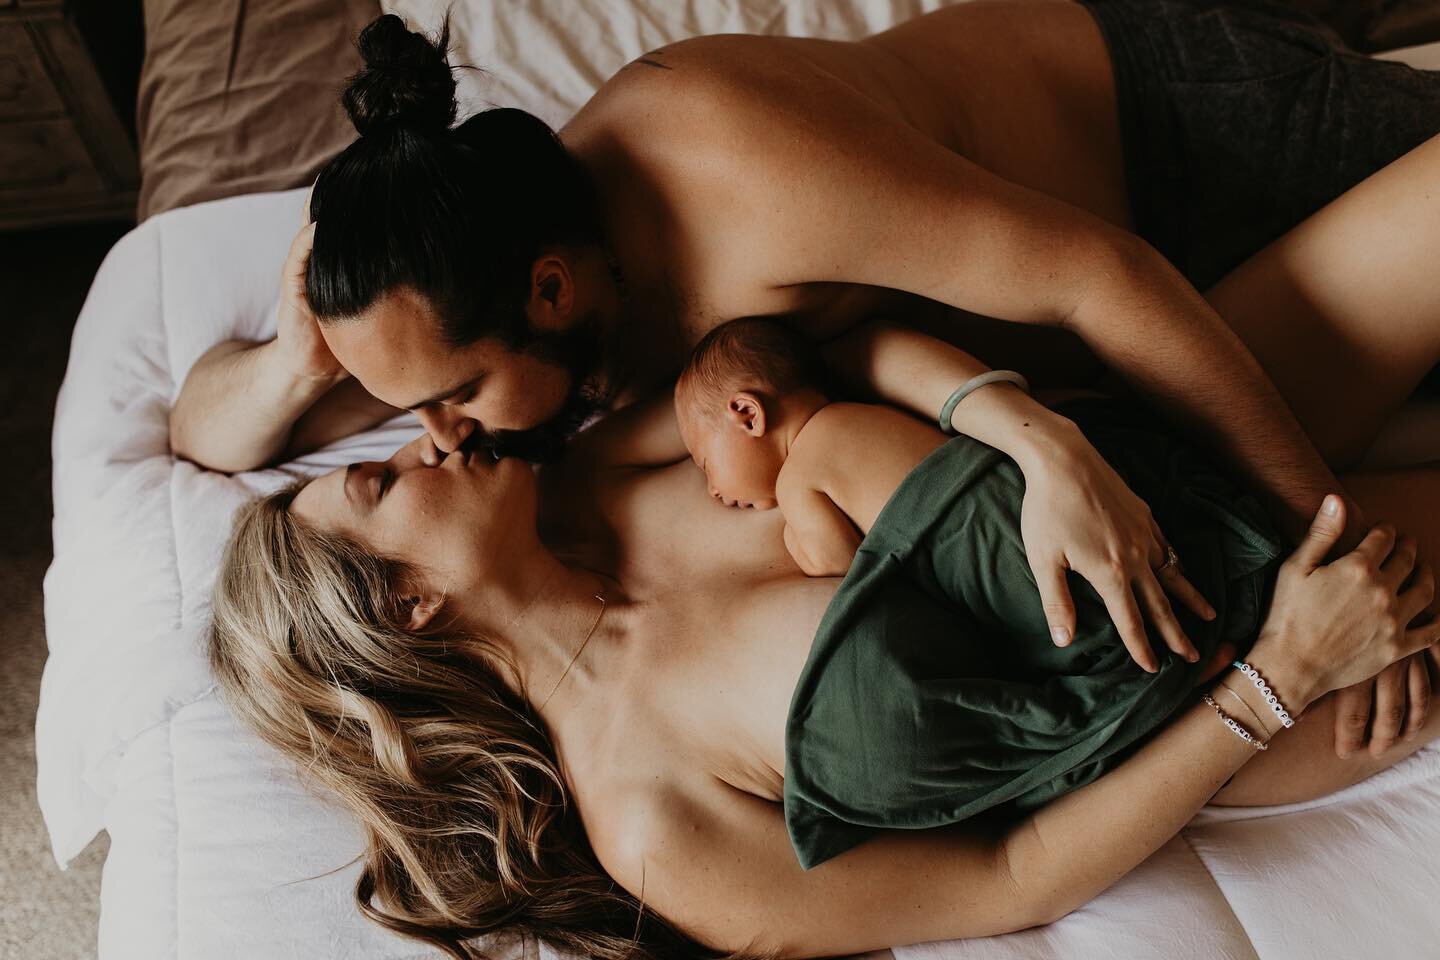 oxytocin highs unlike anything else ✨ i&rsquo;ve said it before, there is nothing like BIRTH! @candypiejones in awe of u! 🤎 

&bull;&bull;
Obsessed with this newborn photoshoot 😍